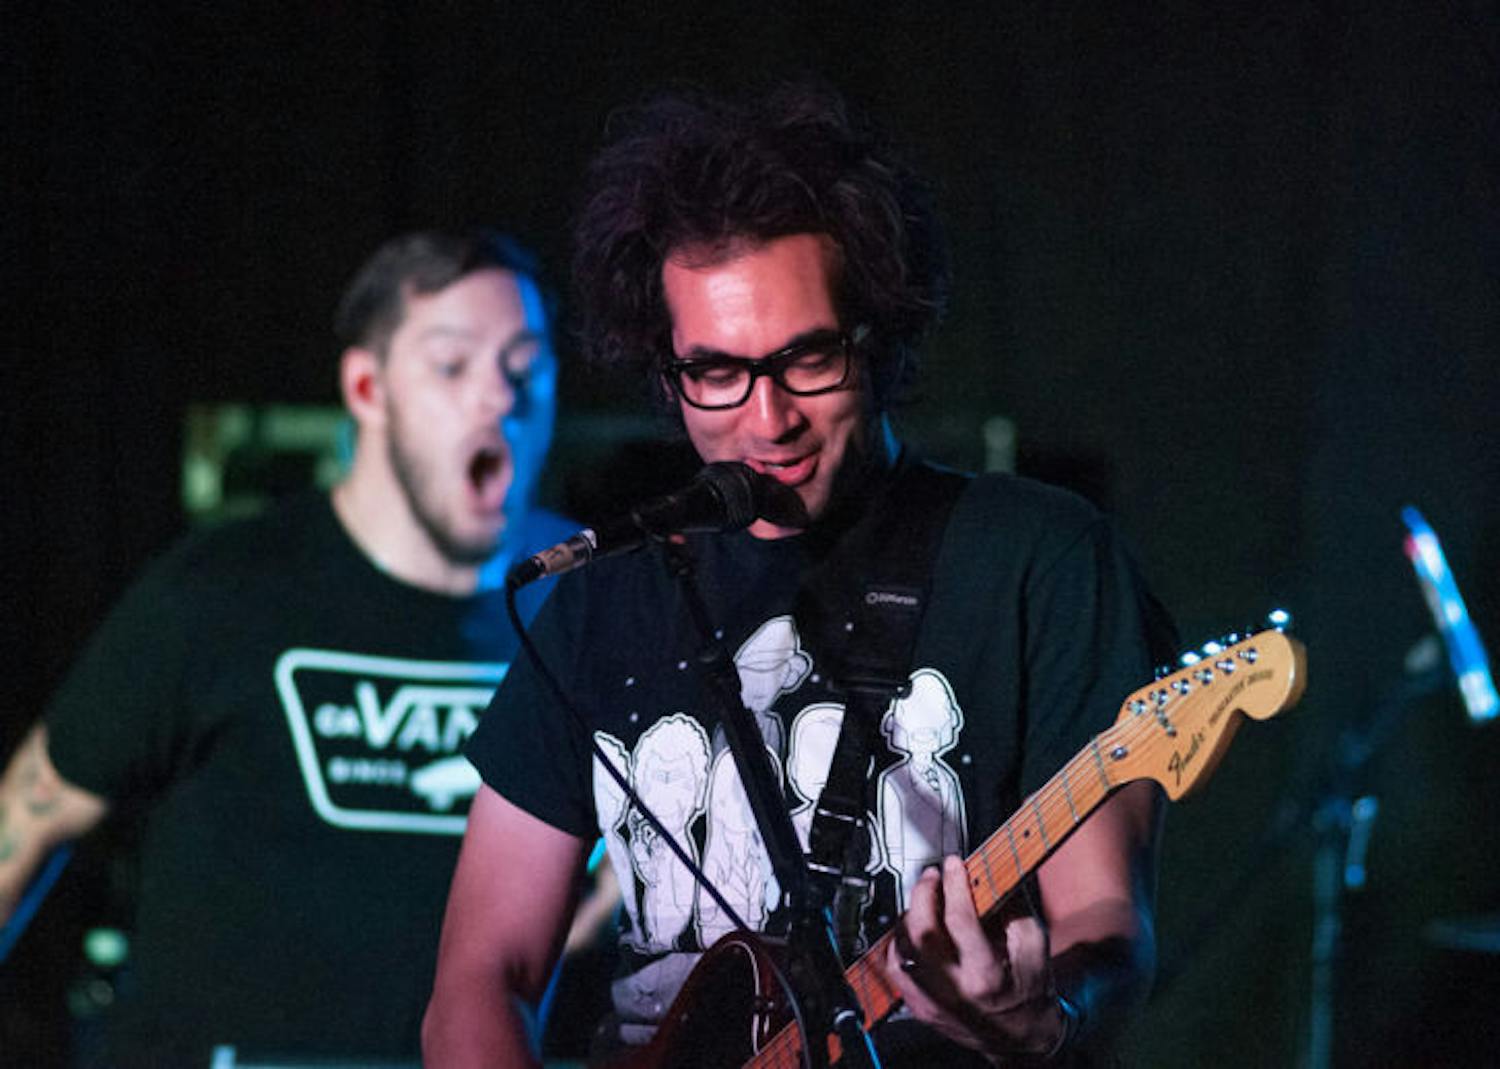 Singer and songwriter Justin Pierre performs with the rest of his band, Motion City Soundtrack, at High Dive on Nov. 6. Relient K and Driver Friendly also played at the show.